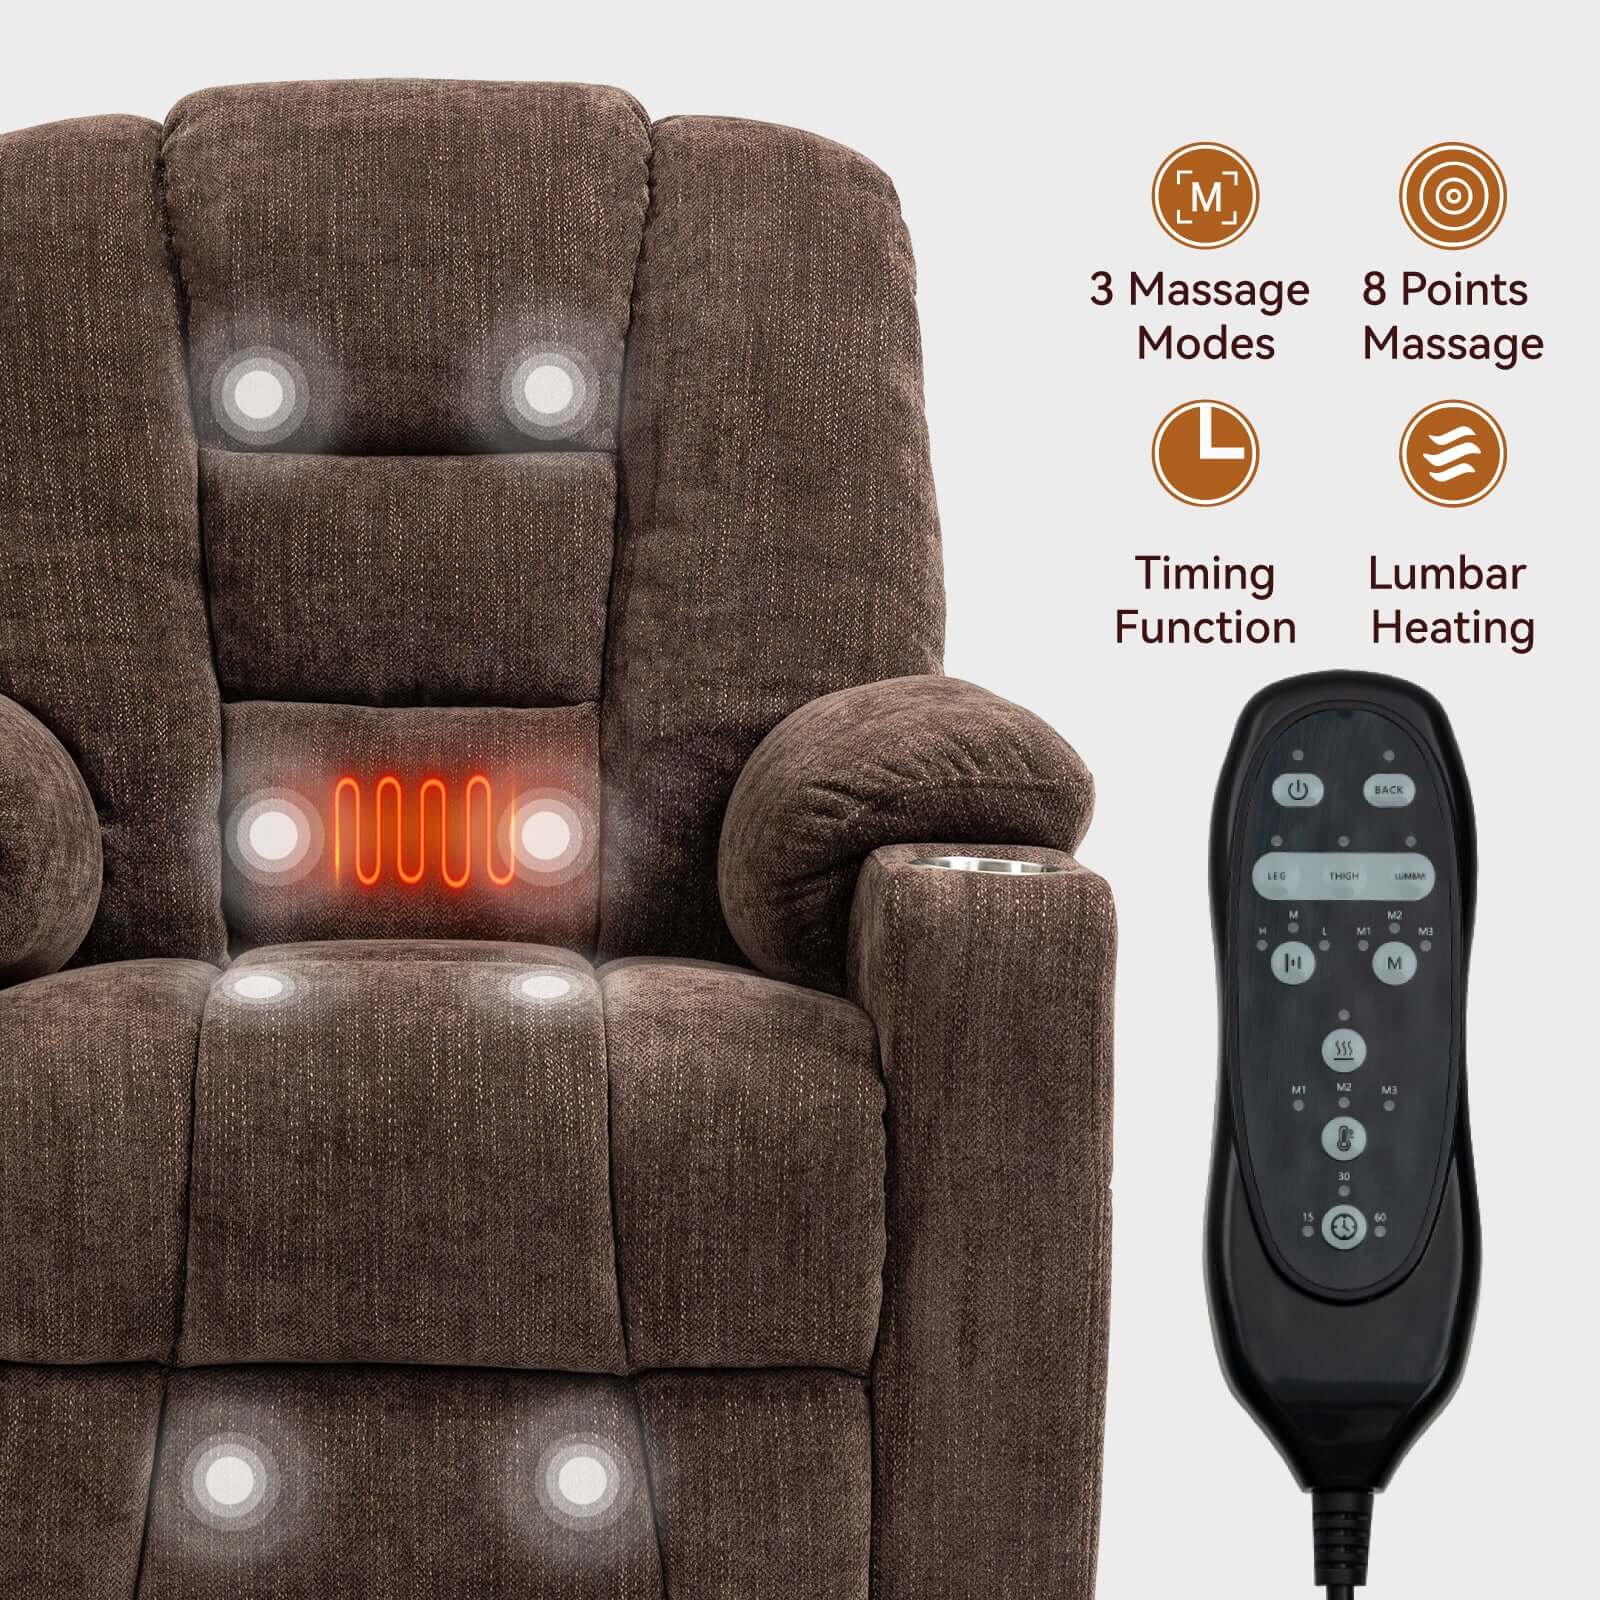 Large Power Lift Recliner Chair with Massage and Heat